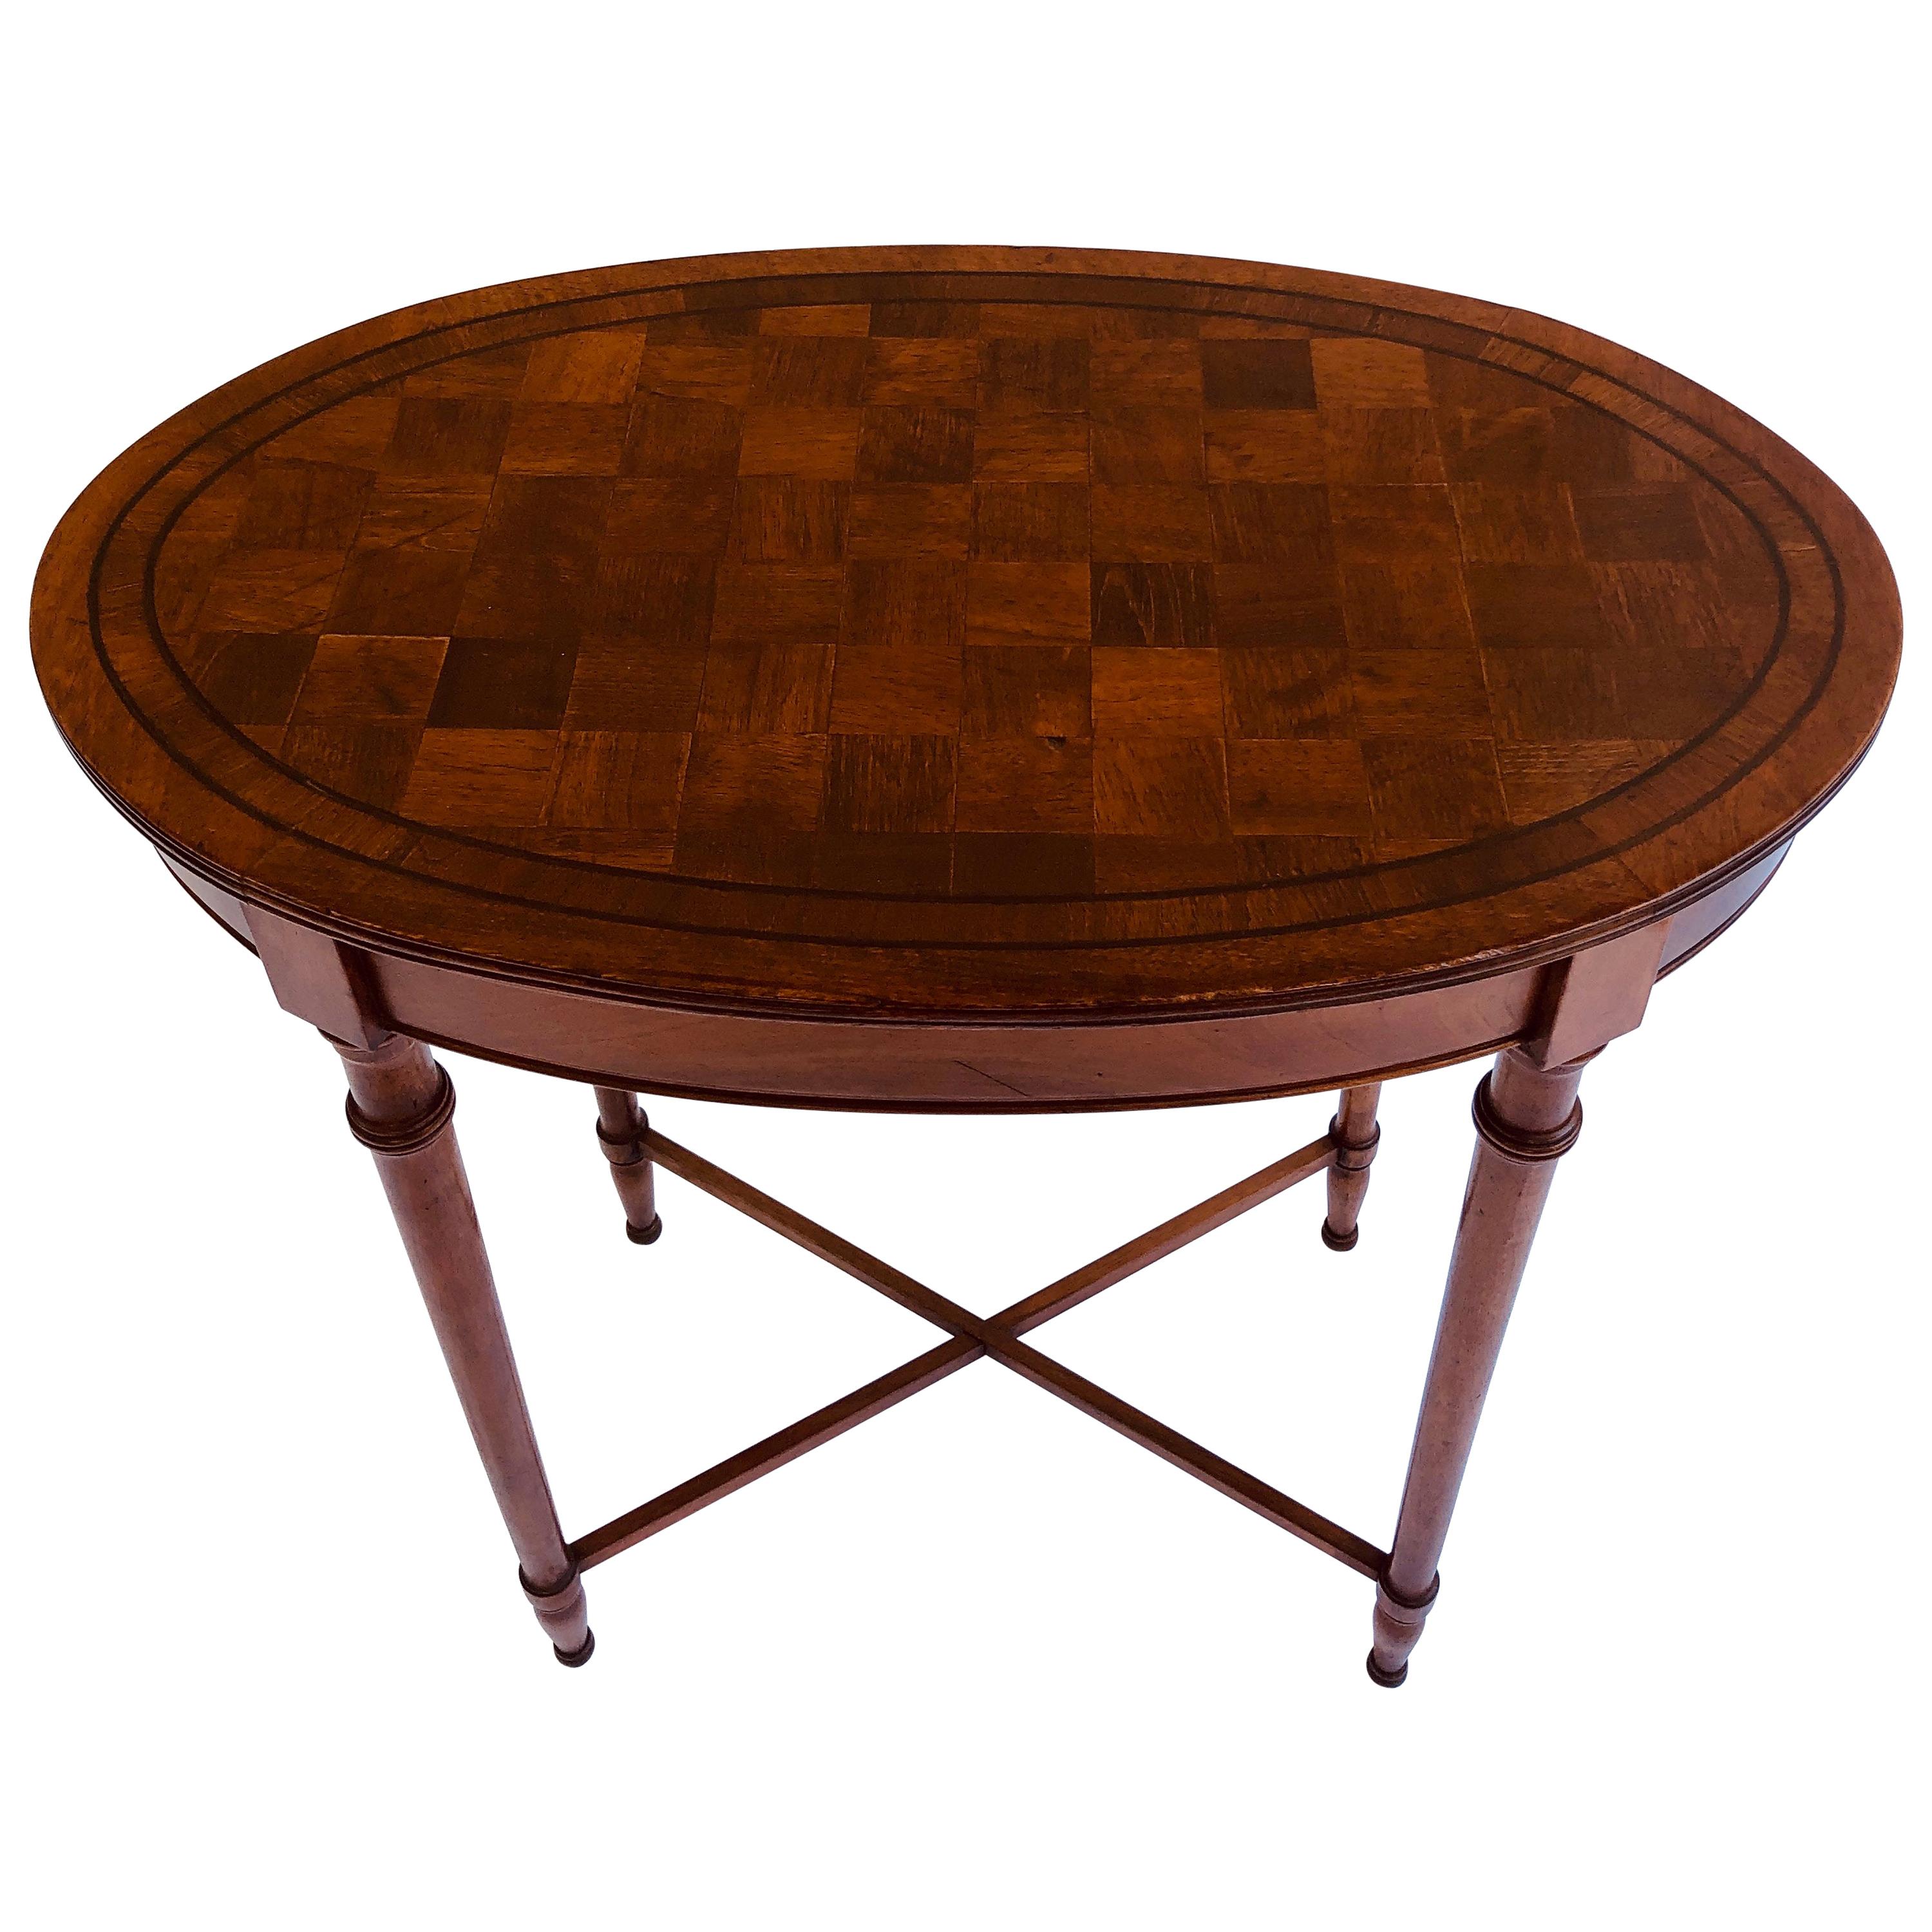 Quality Victorian Antique Oval Walnut Chequered Table